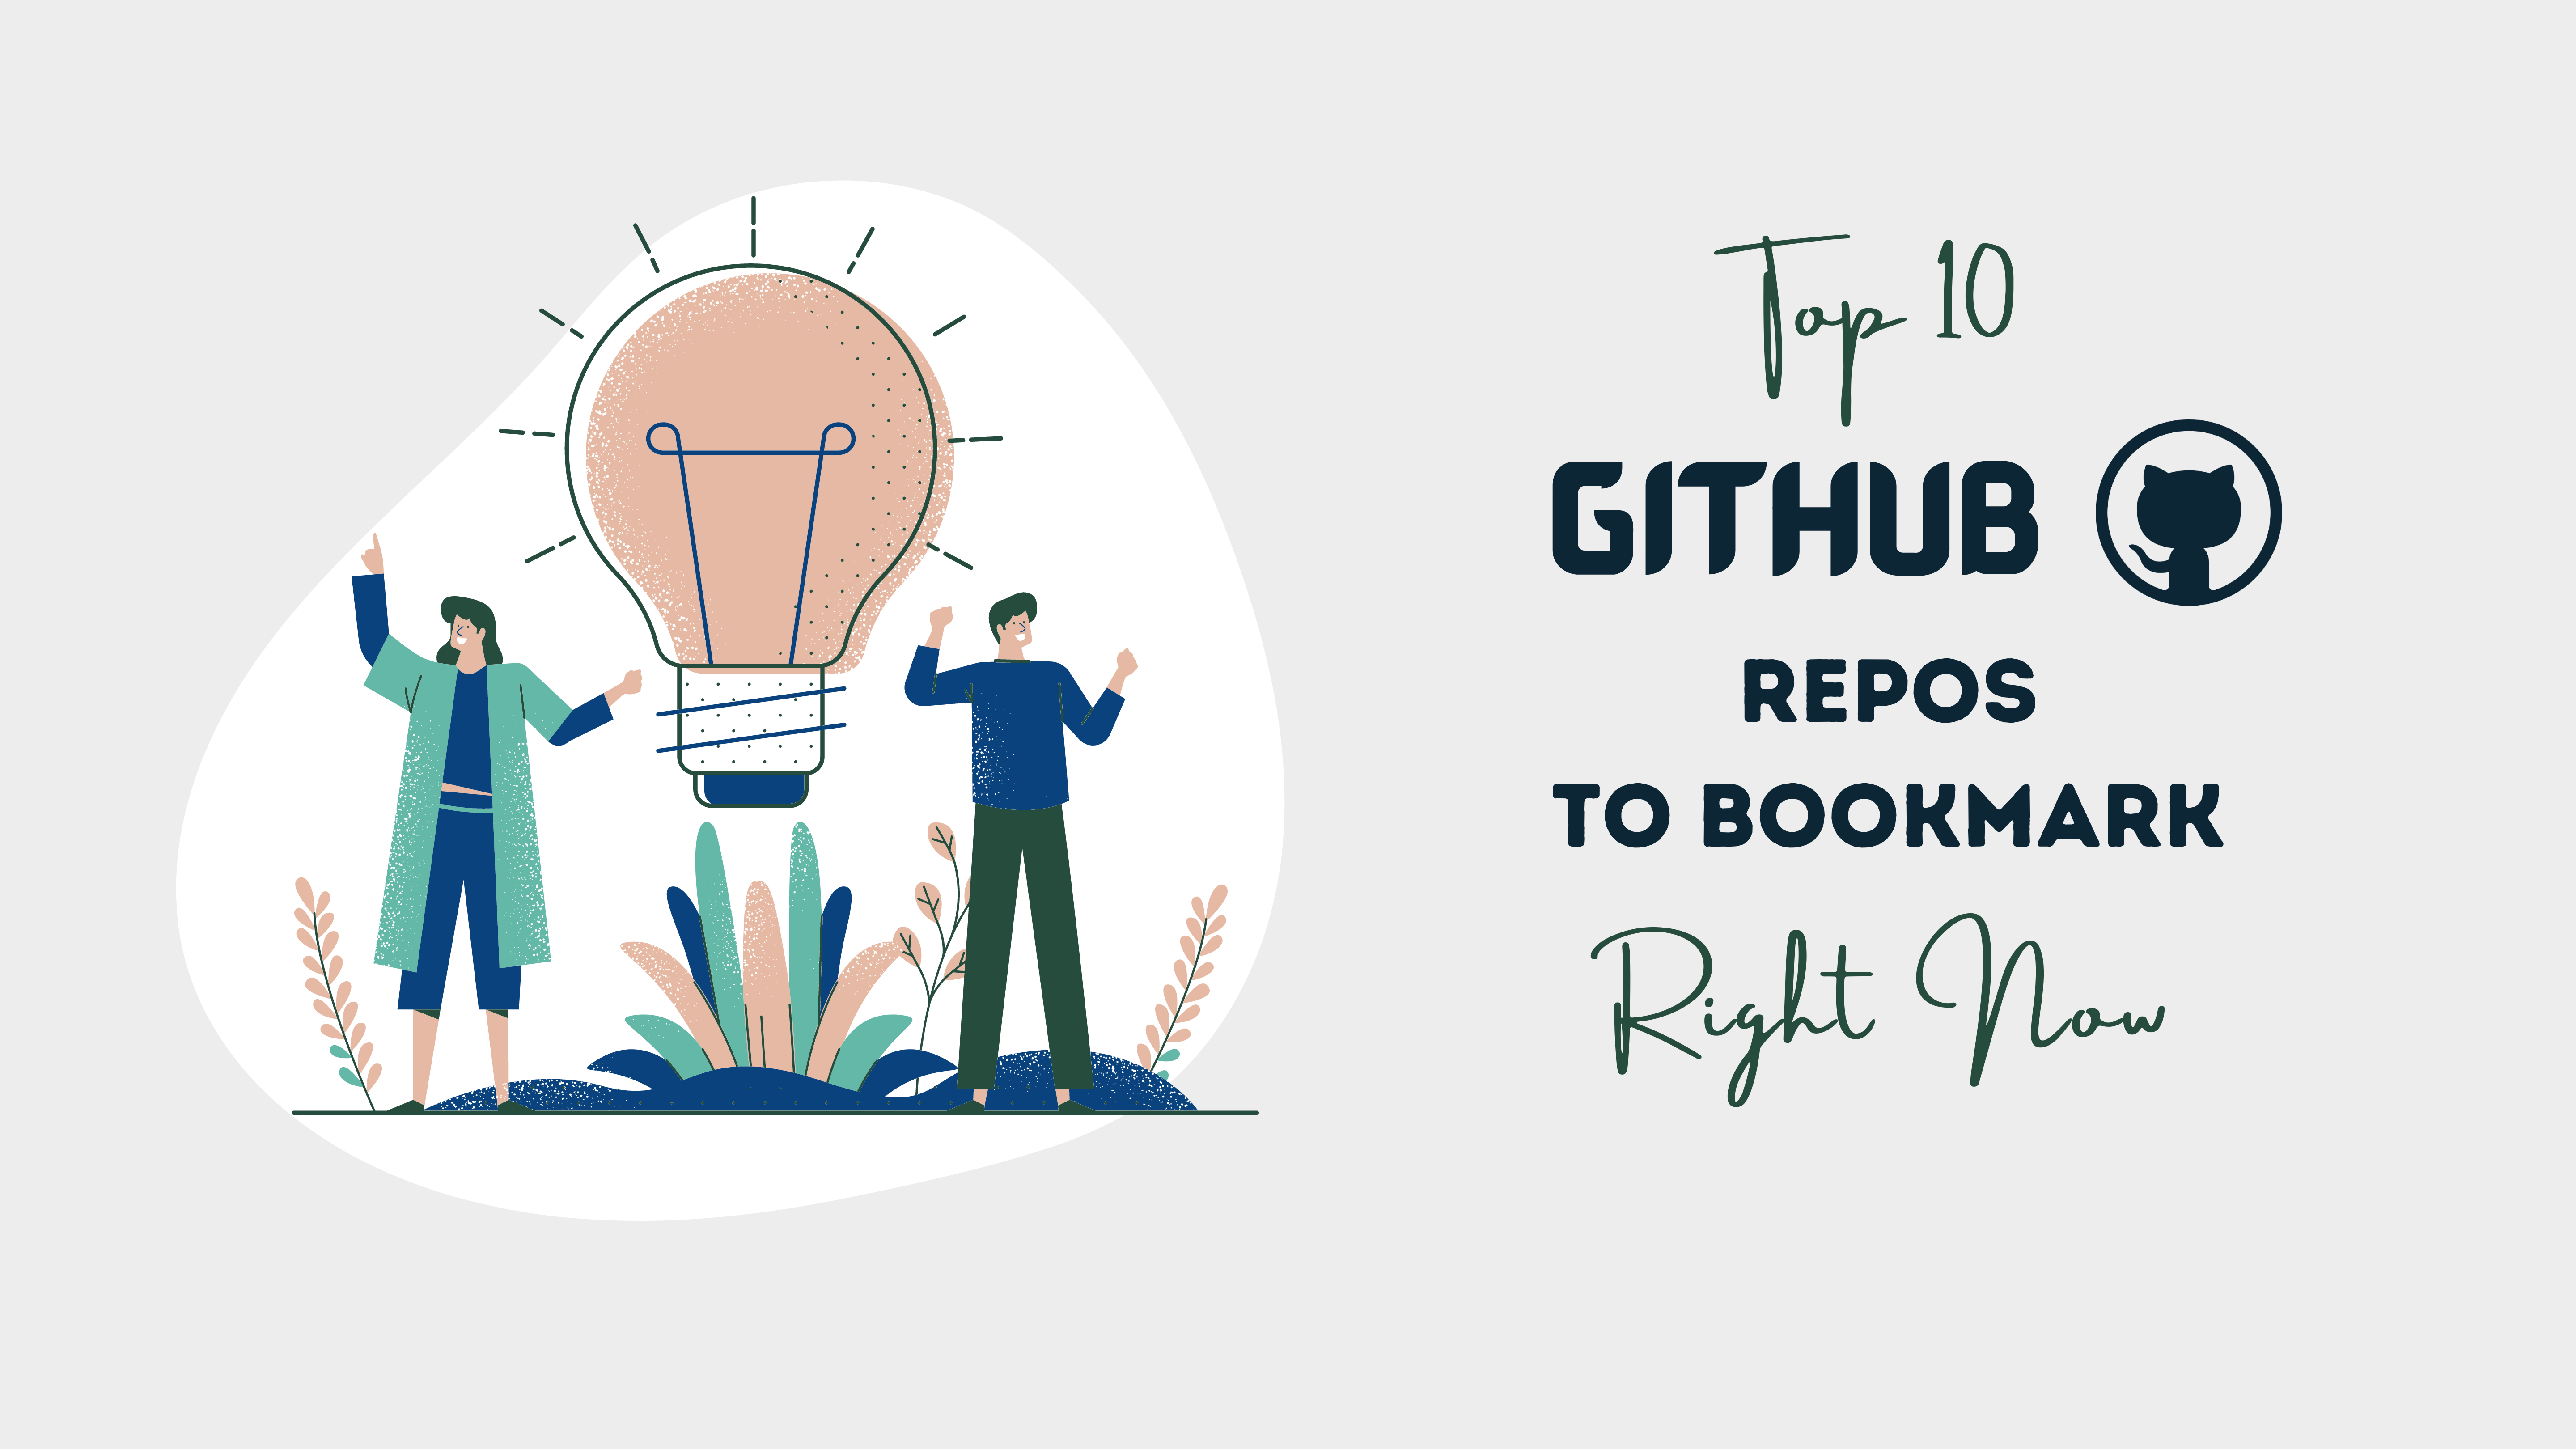 10 GitHub Repos Every Developer Should Know | Image by Author